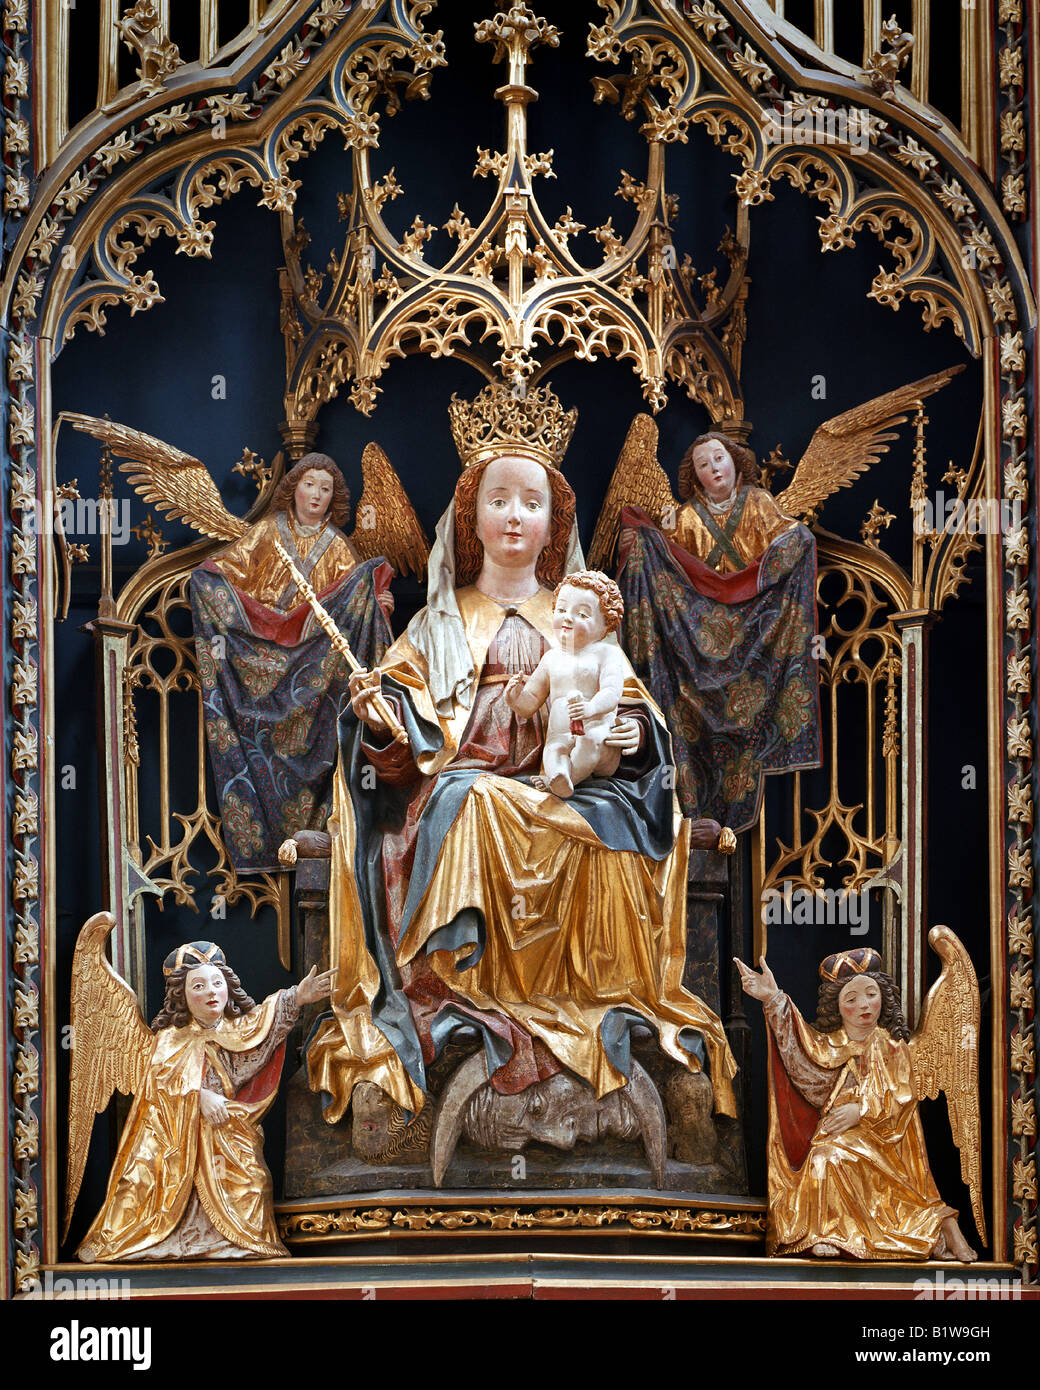 AT - LOWER AUSTRIA: Altarpiece at Maria Laach Stock Photo